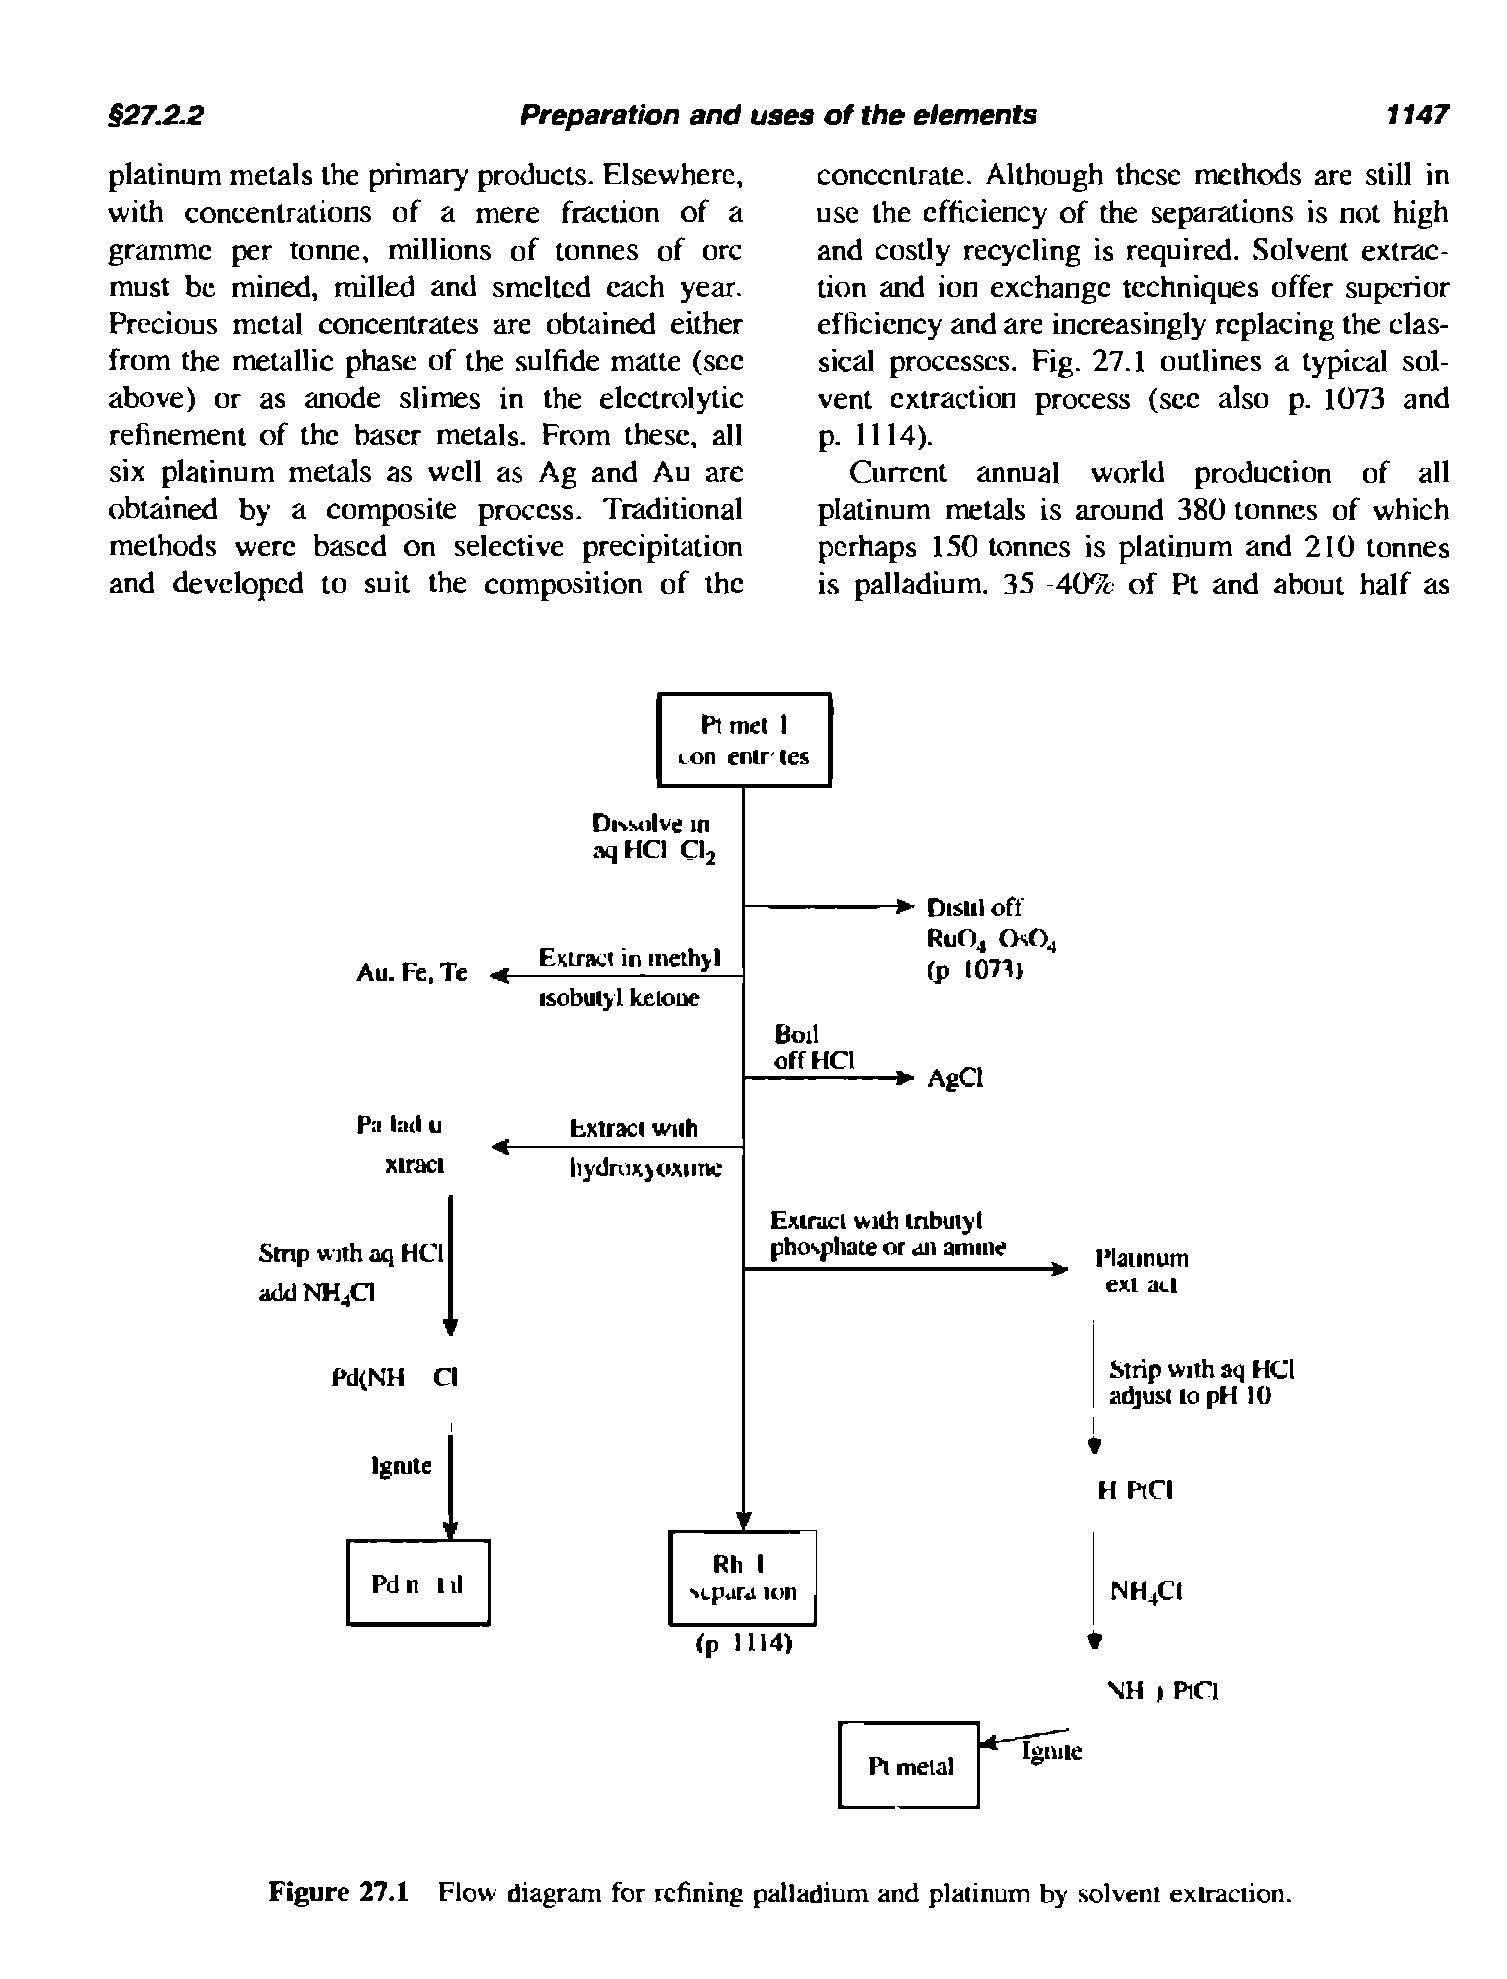 Figure 27.1 Flow diagram for refining palladium and platinum by solvent extraction.